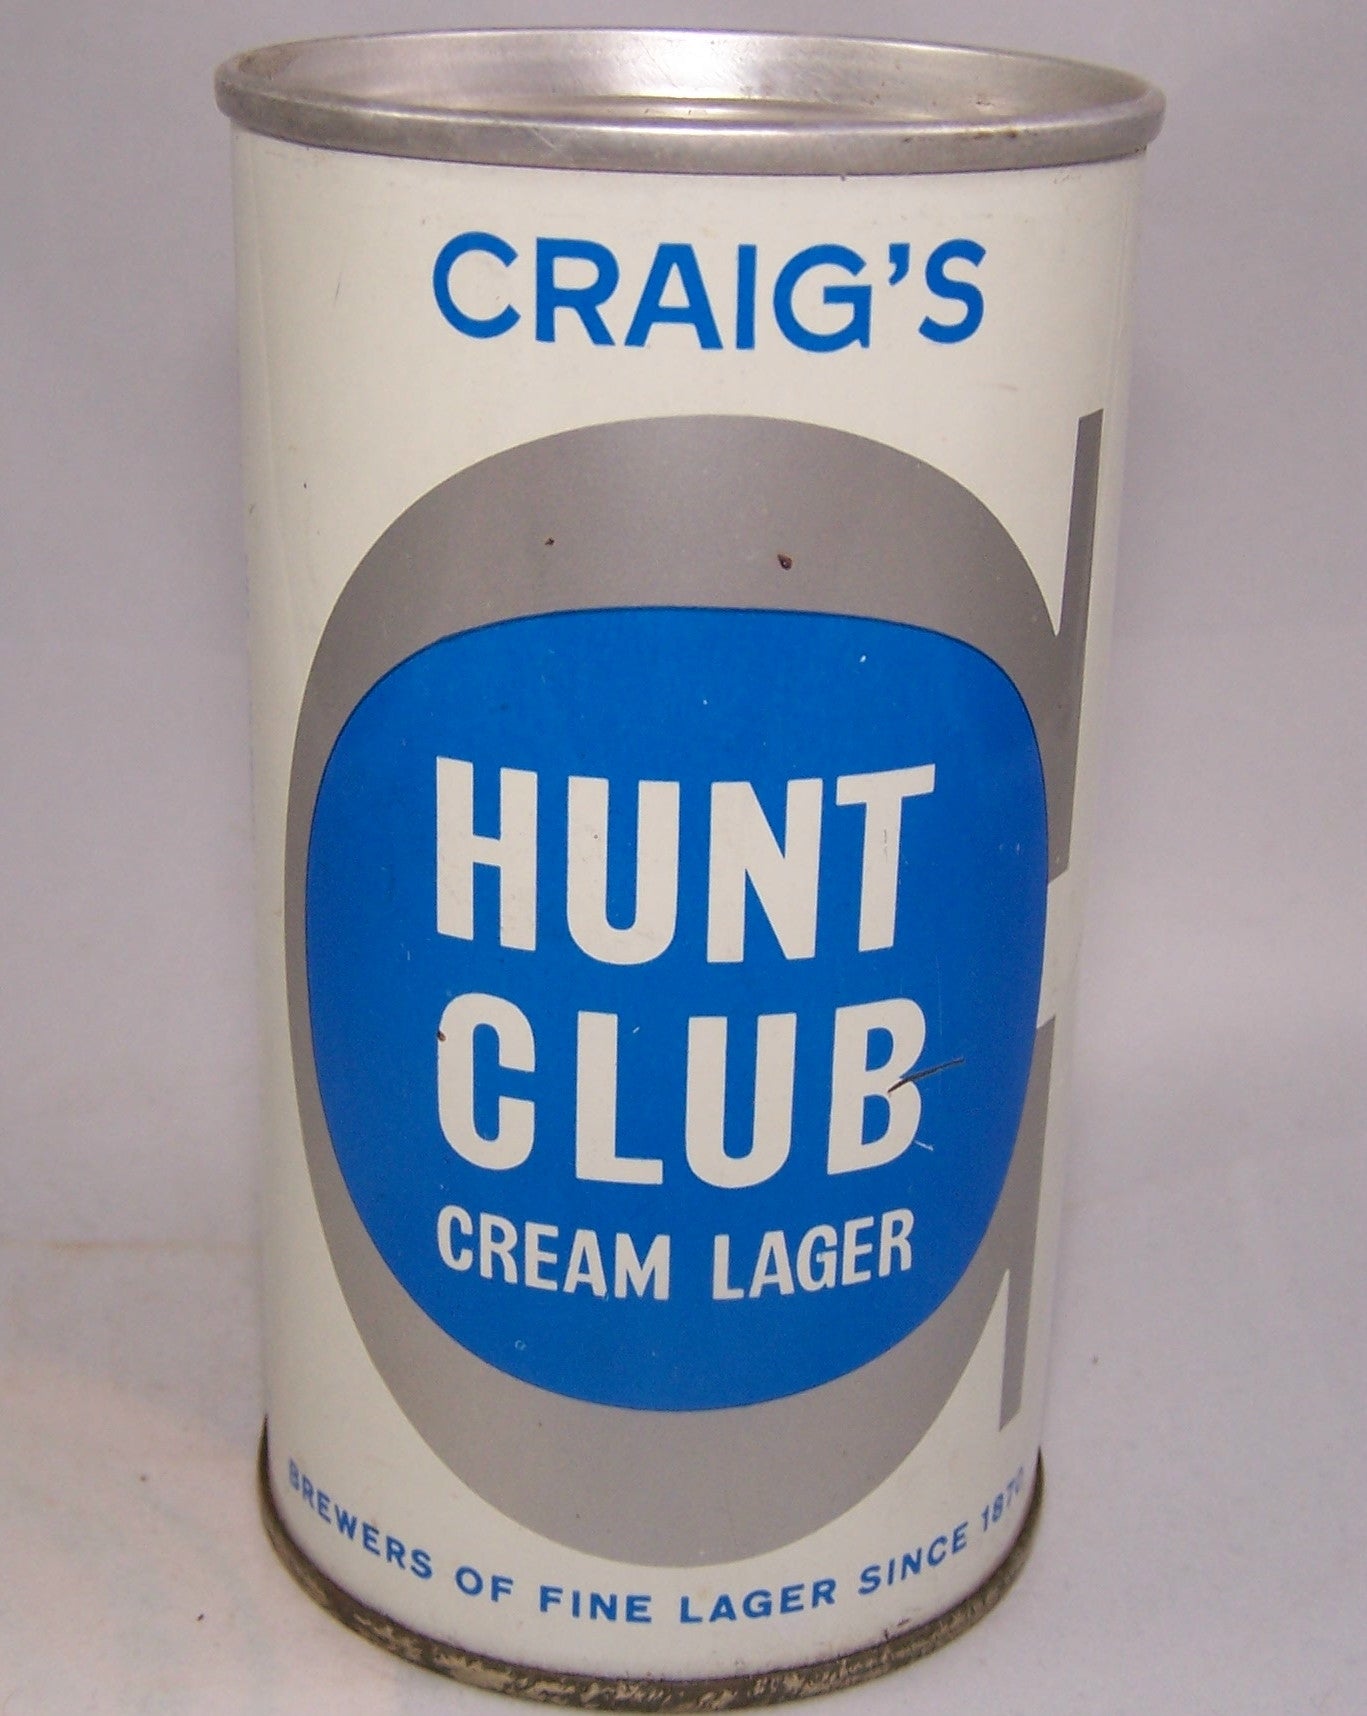 Craig's Hunt Club Cream Lager, Canadian Ziptop, Grade A1+Sold on 10/14/15